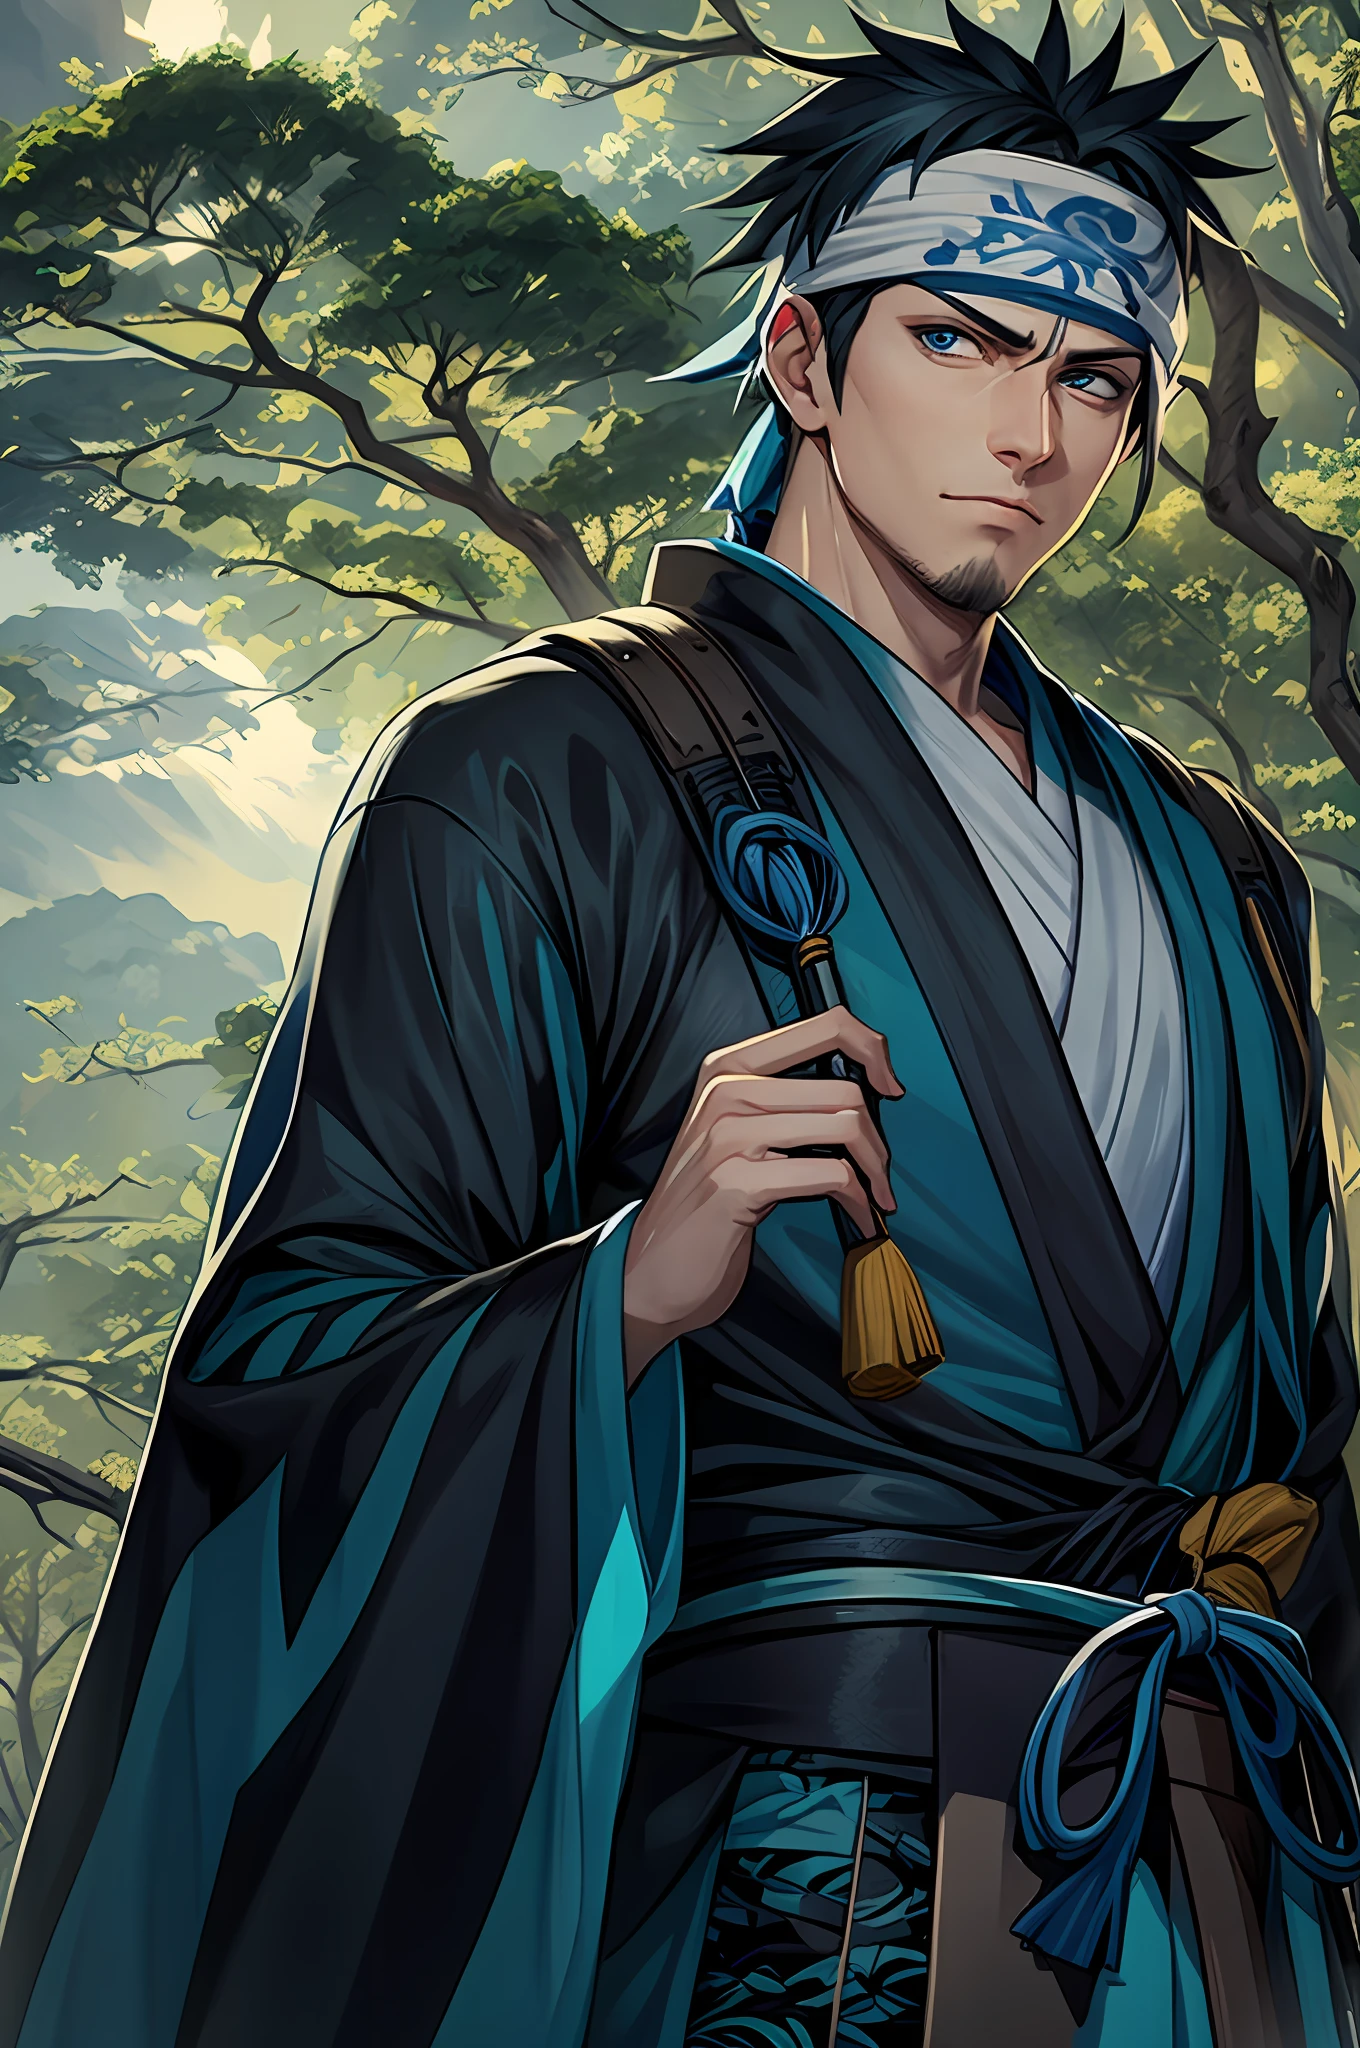 Masterpiece artwork, best qualityer, ultra detali, illustation, hatake Kakashi, a man with white hair and black eyes, looks at the camera with a serious look on his face., blue kimono, blue outfit, Bandana on forehead